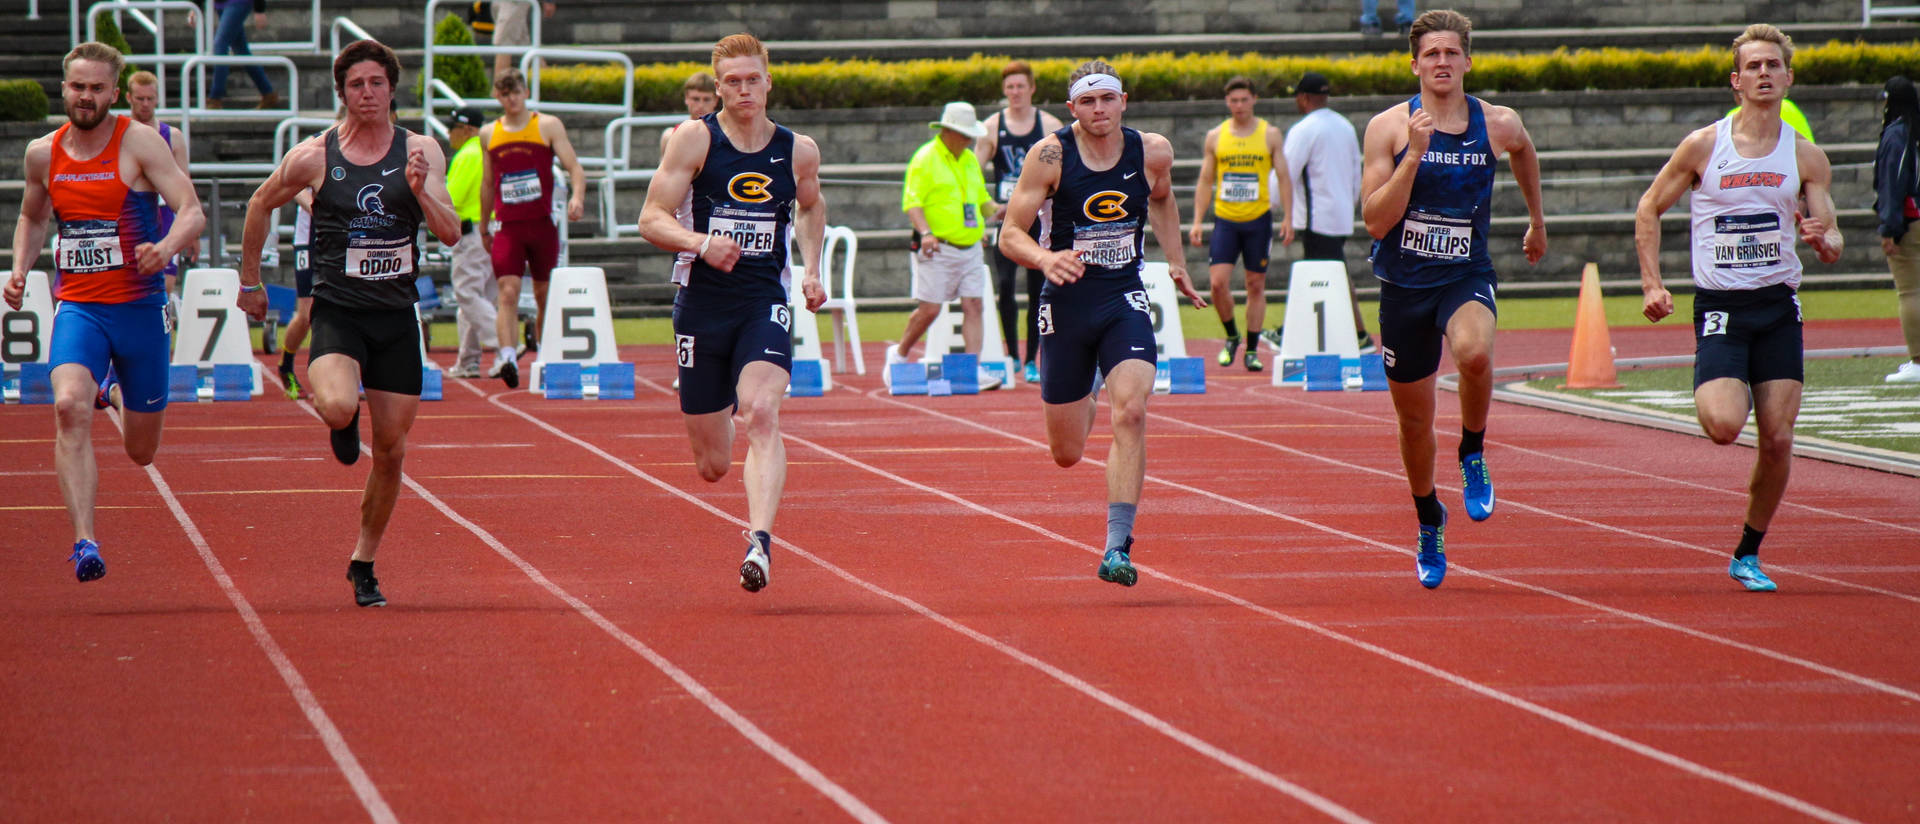 The Blugold men's track and field team captured the program's first NCAA Division III Outdoor Championship in May. (Photo by Dan Schwamberger)